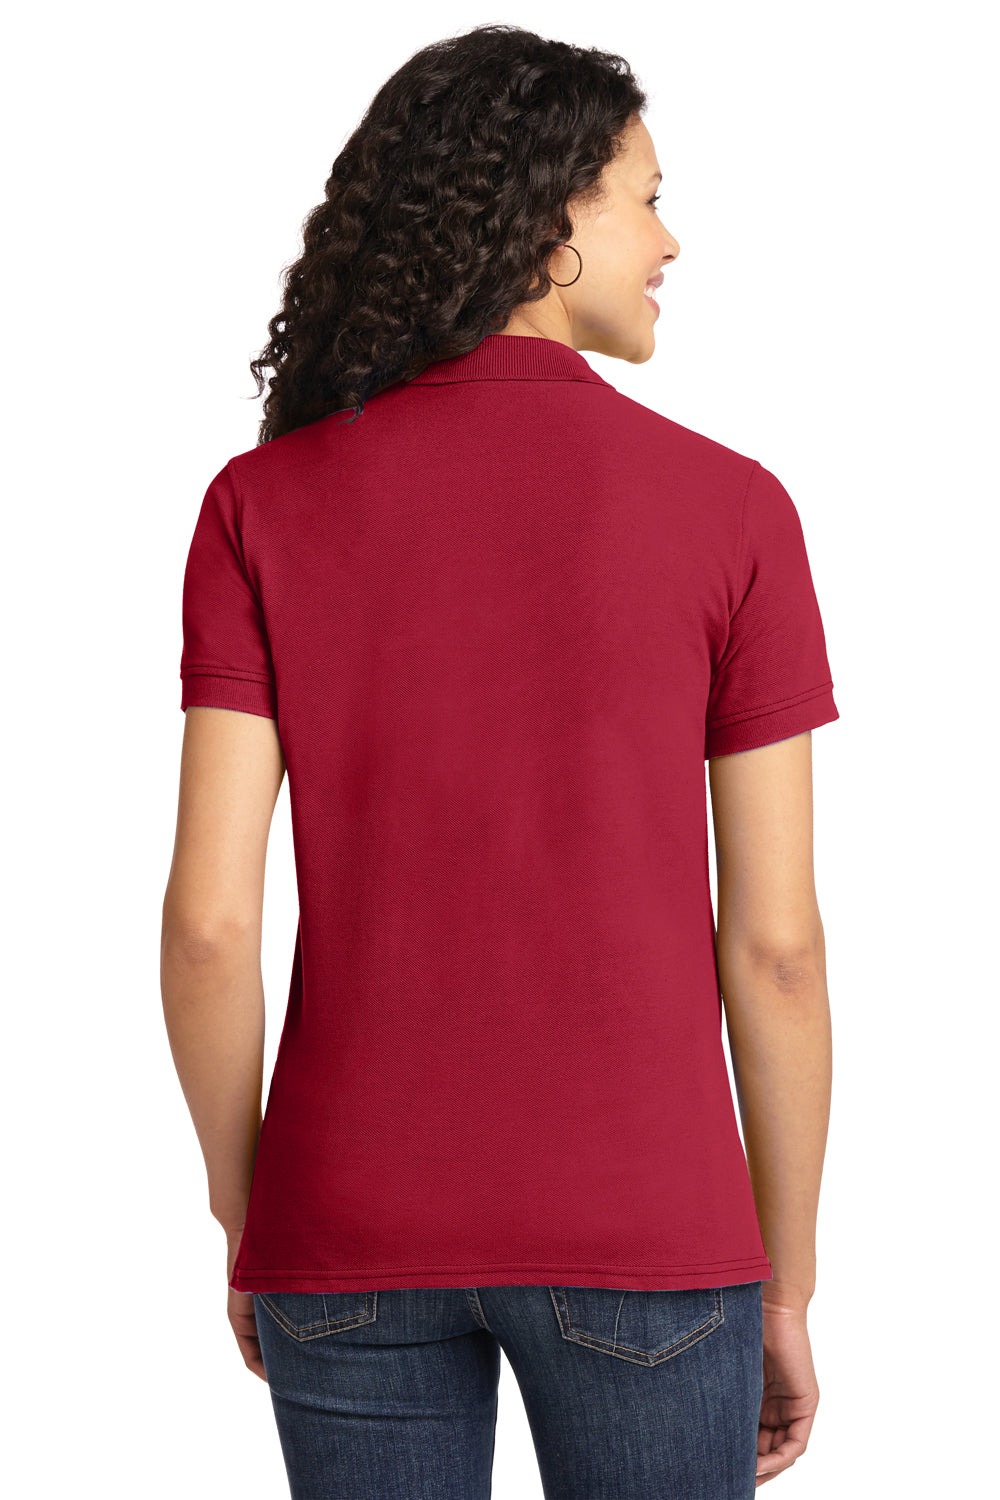 Port & Company LKP155 Womens Core Stain Resistant Short Sleeve Polo Shirt Red Back